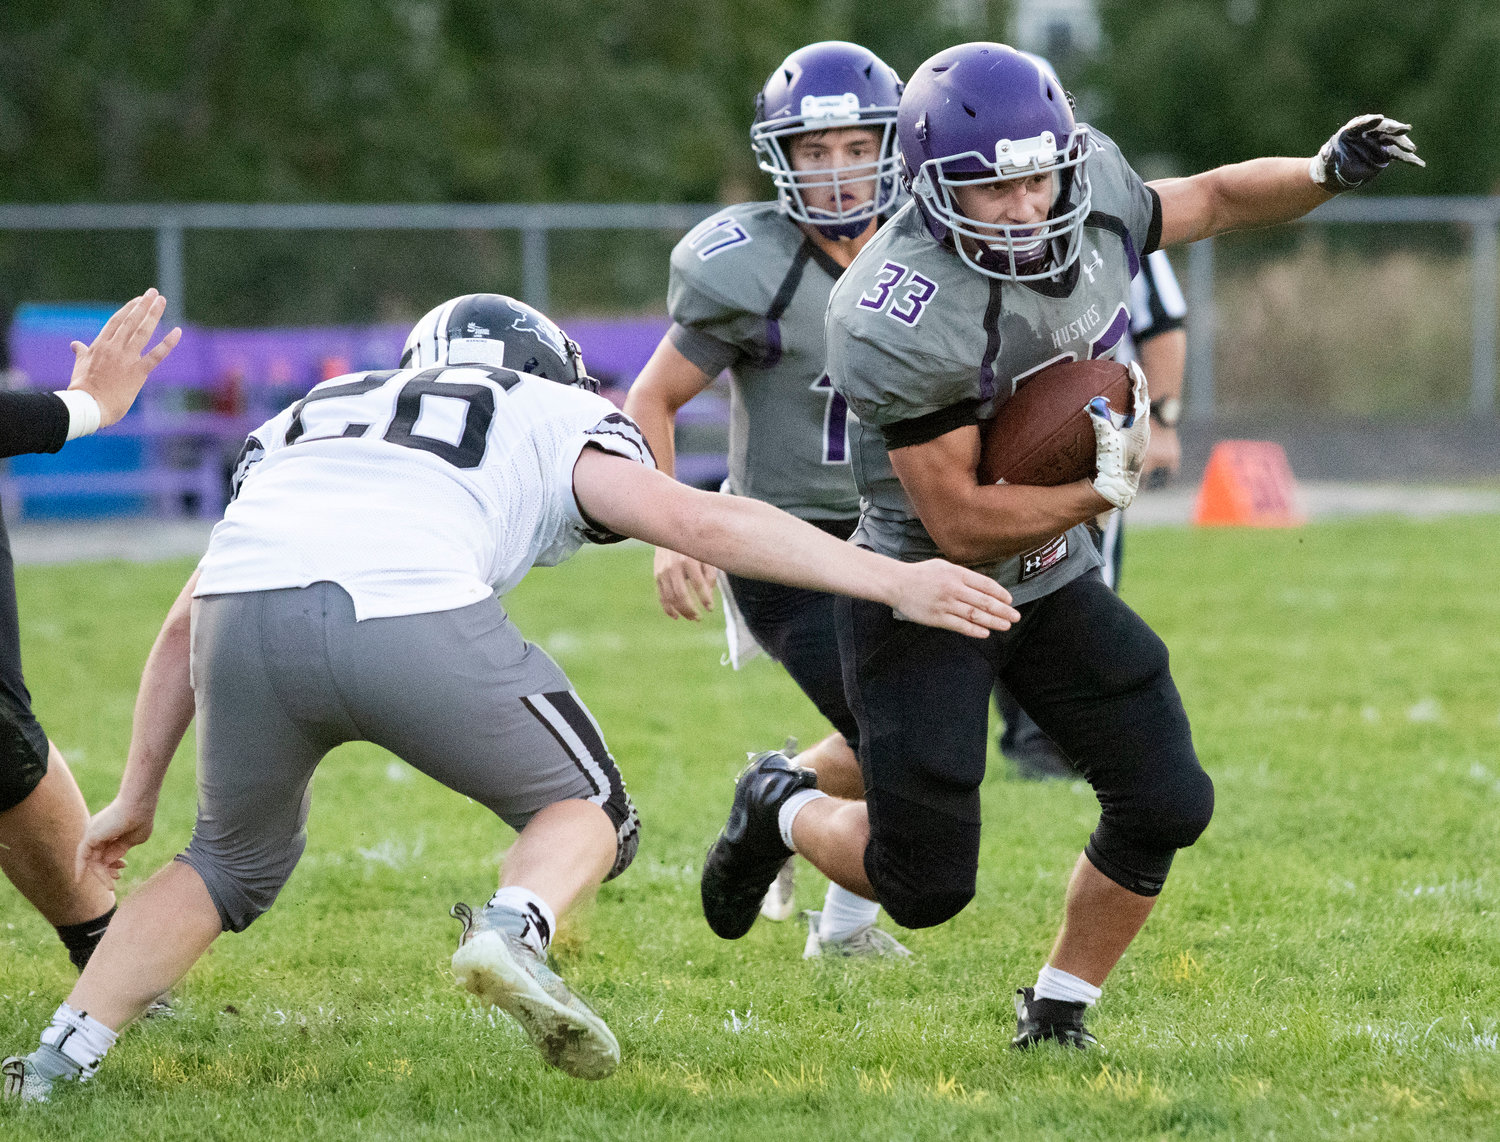 Huskies senior running back Brock Pacheco rushed for 117 yards and a touchdown during the loss to Pilgrim. Quarterback Riley Howland looks on.